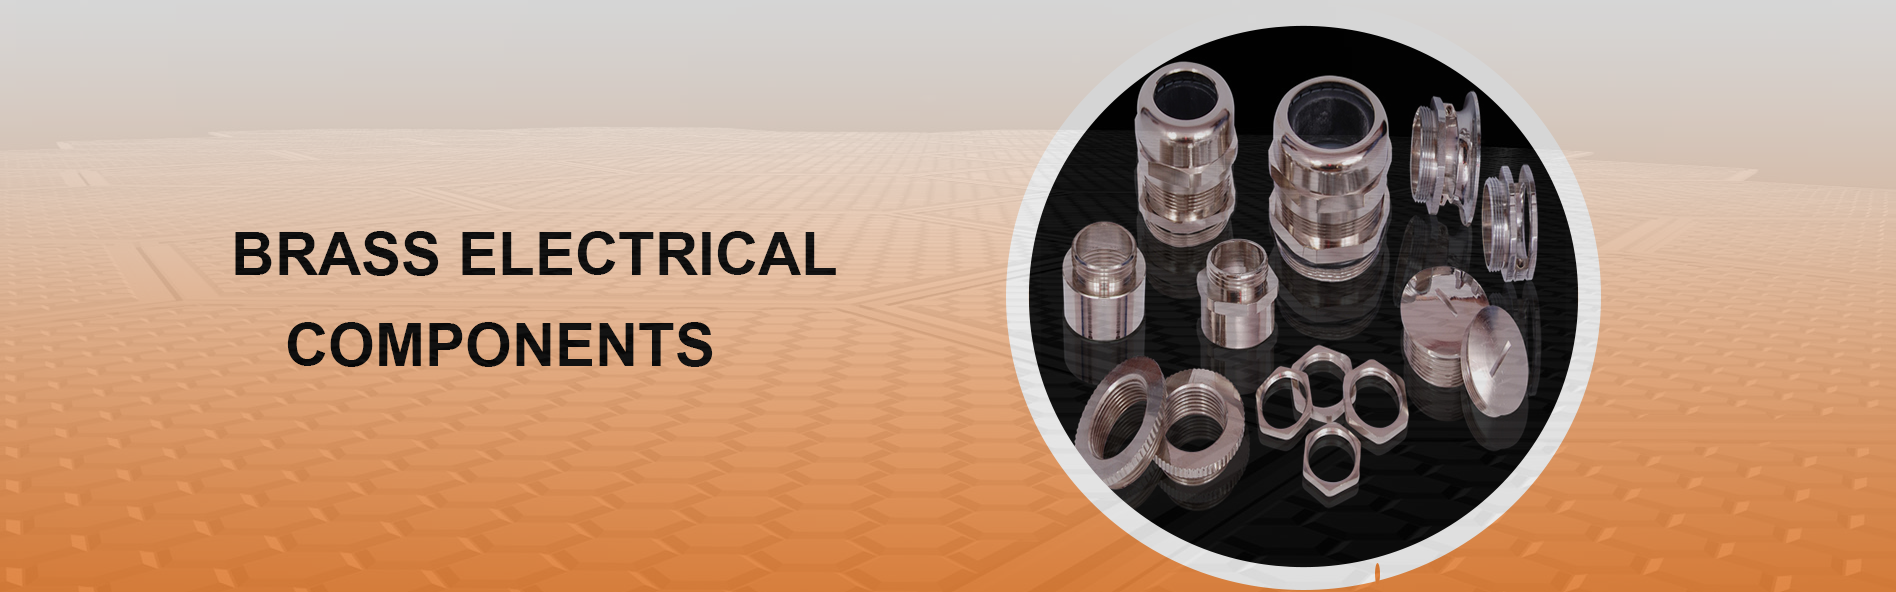 brass electrical components manufacturer